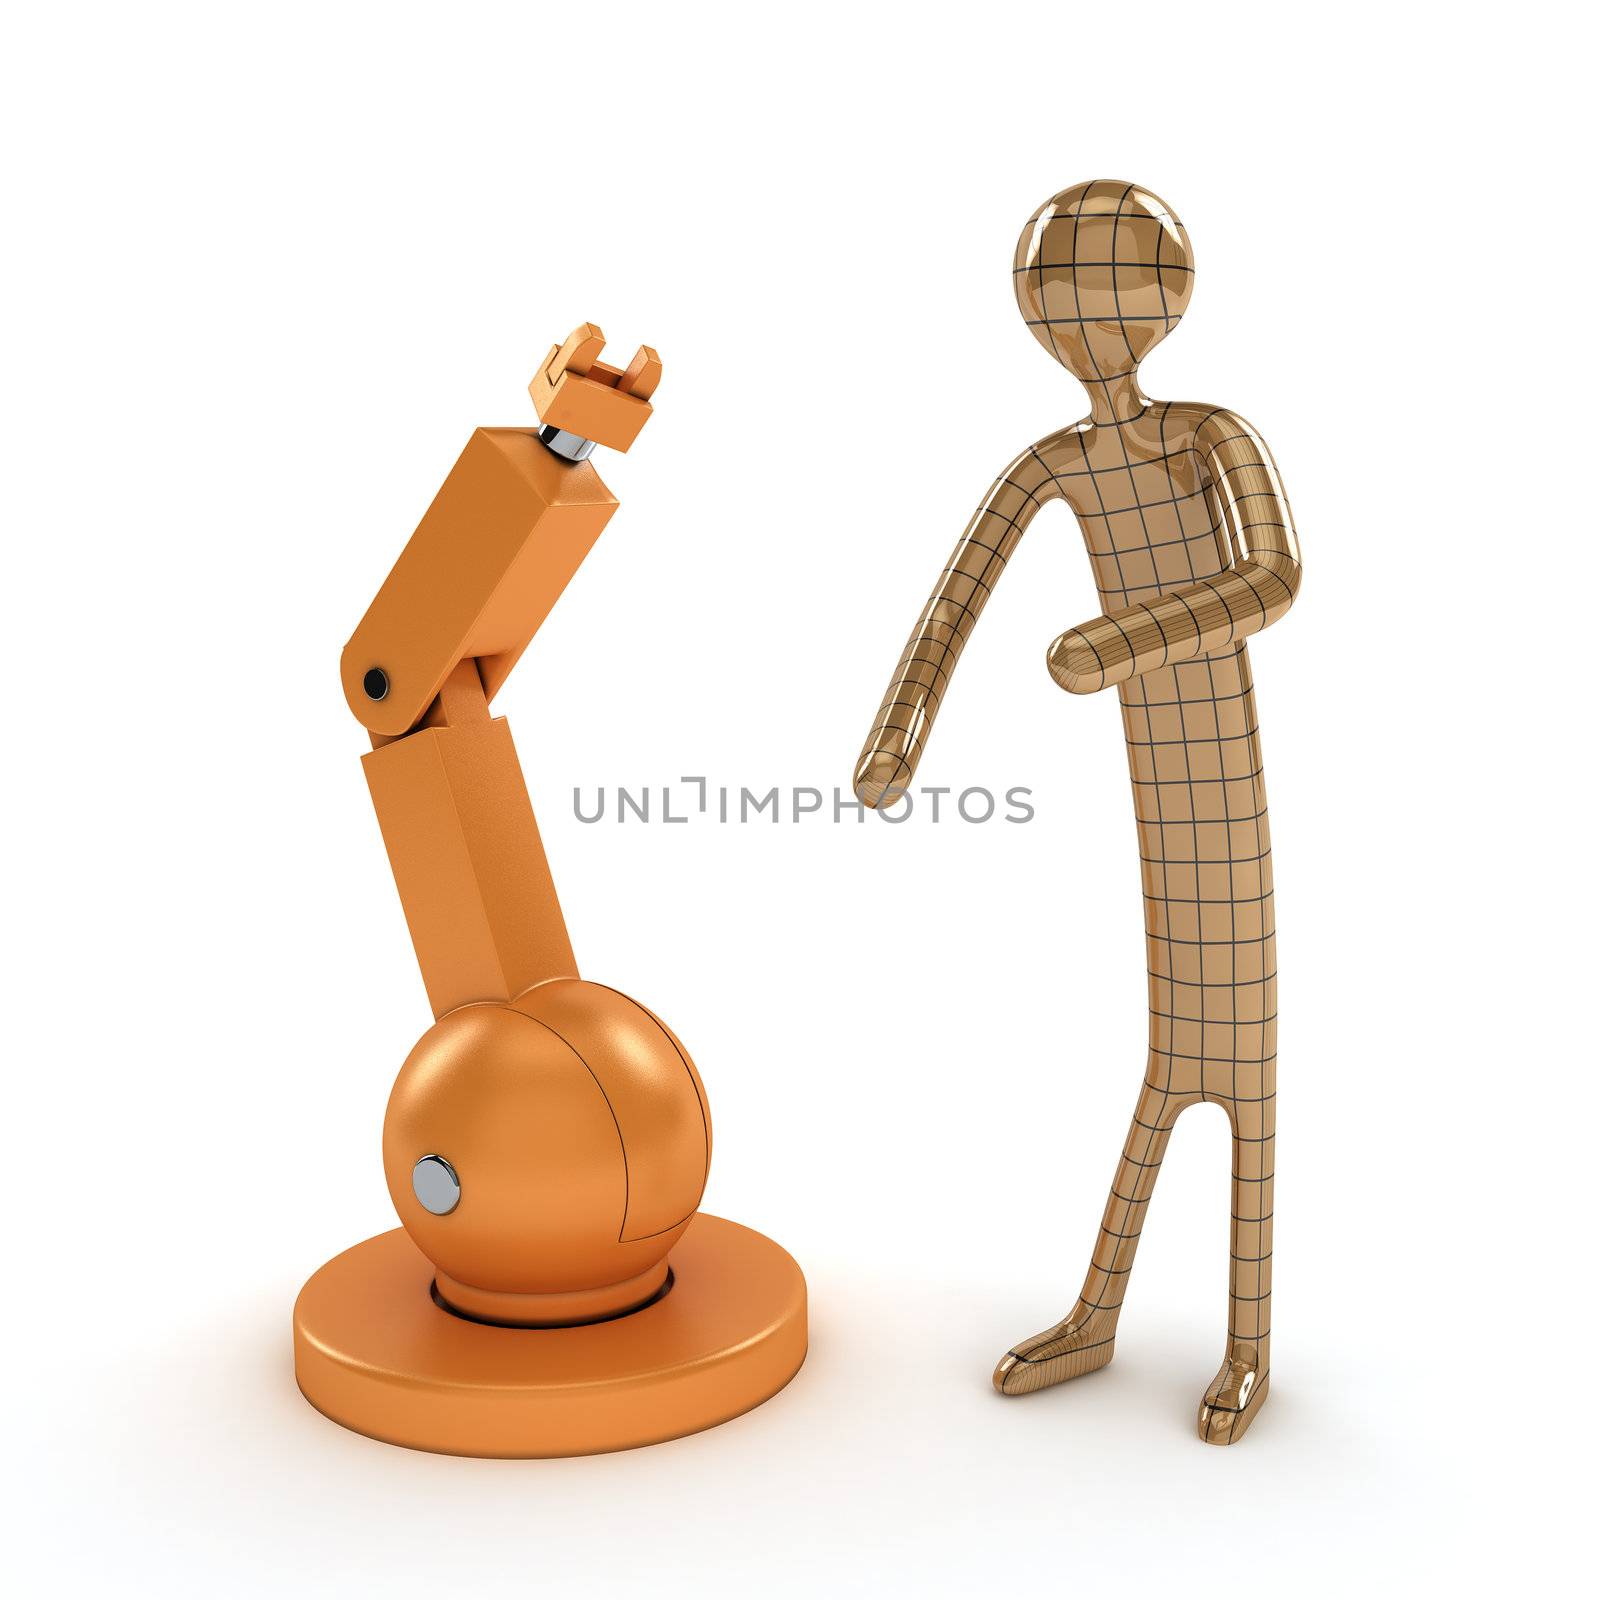 Mechanical robot and humanoid are interacting with each other